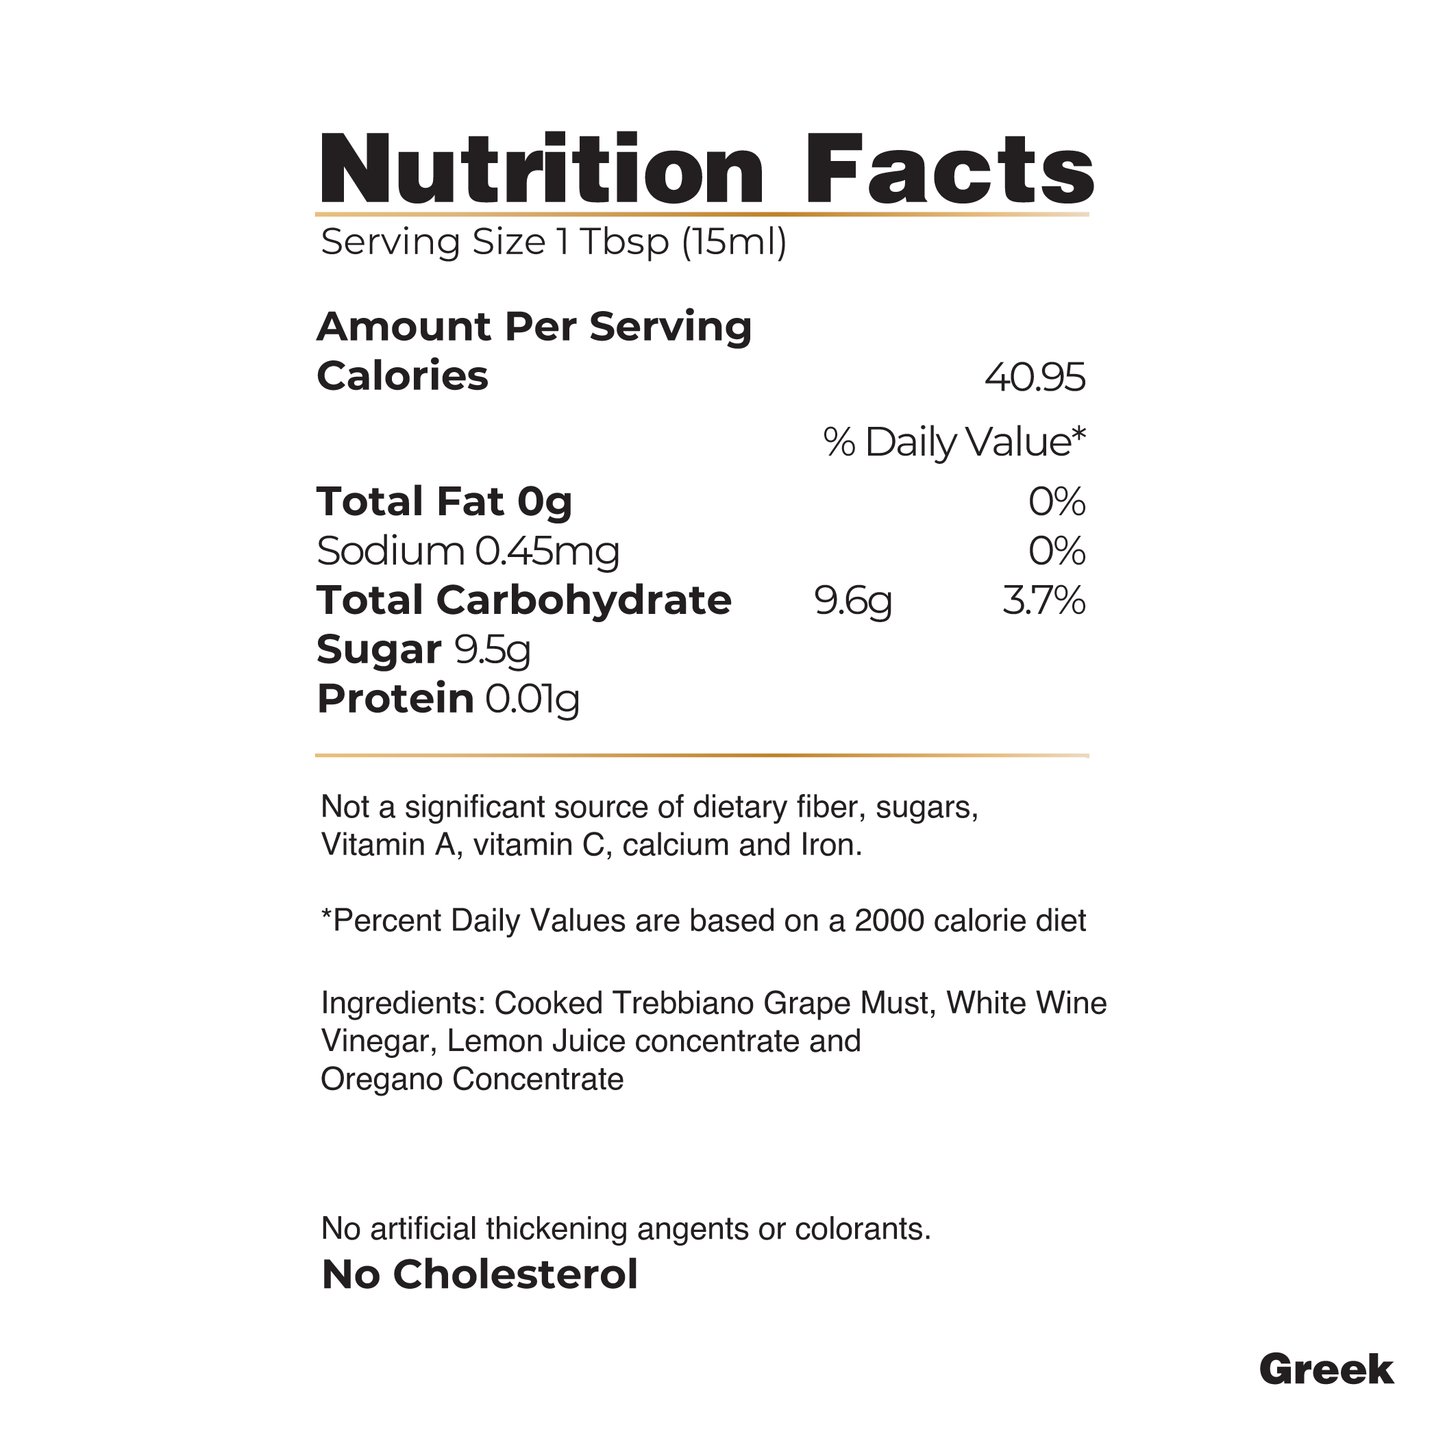 A nutrition facts label for Tastefully Olive's Greek Seasoning White Balsamic Vinegar shows a serving size of 1 Tbsp (15ml) with 40.95 calories, 9.6g total carbohydrates, 9.5g sugar, 0.45mg sodium, and 0.01g protein per serving. The ingredient list is provided and it notes that the product contains no cholesterol.
